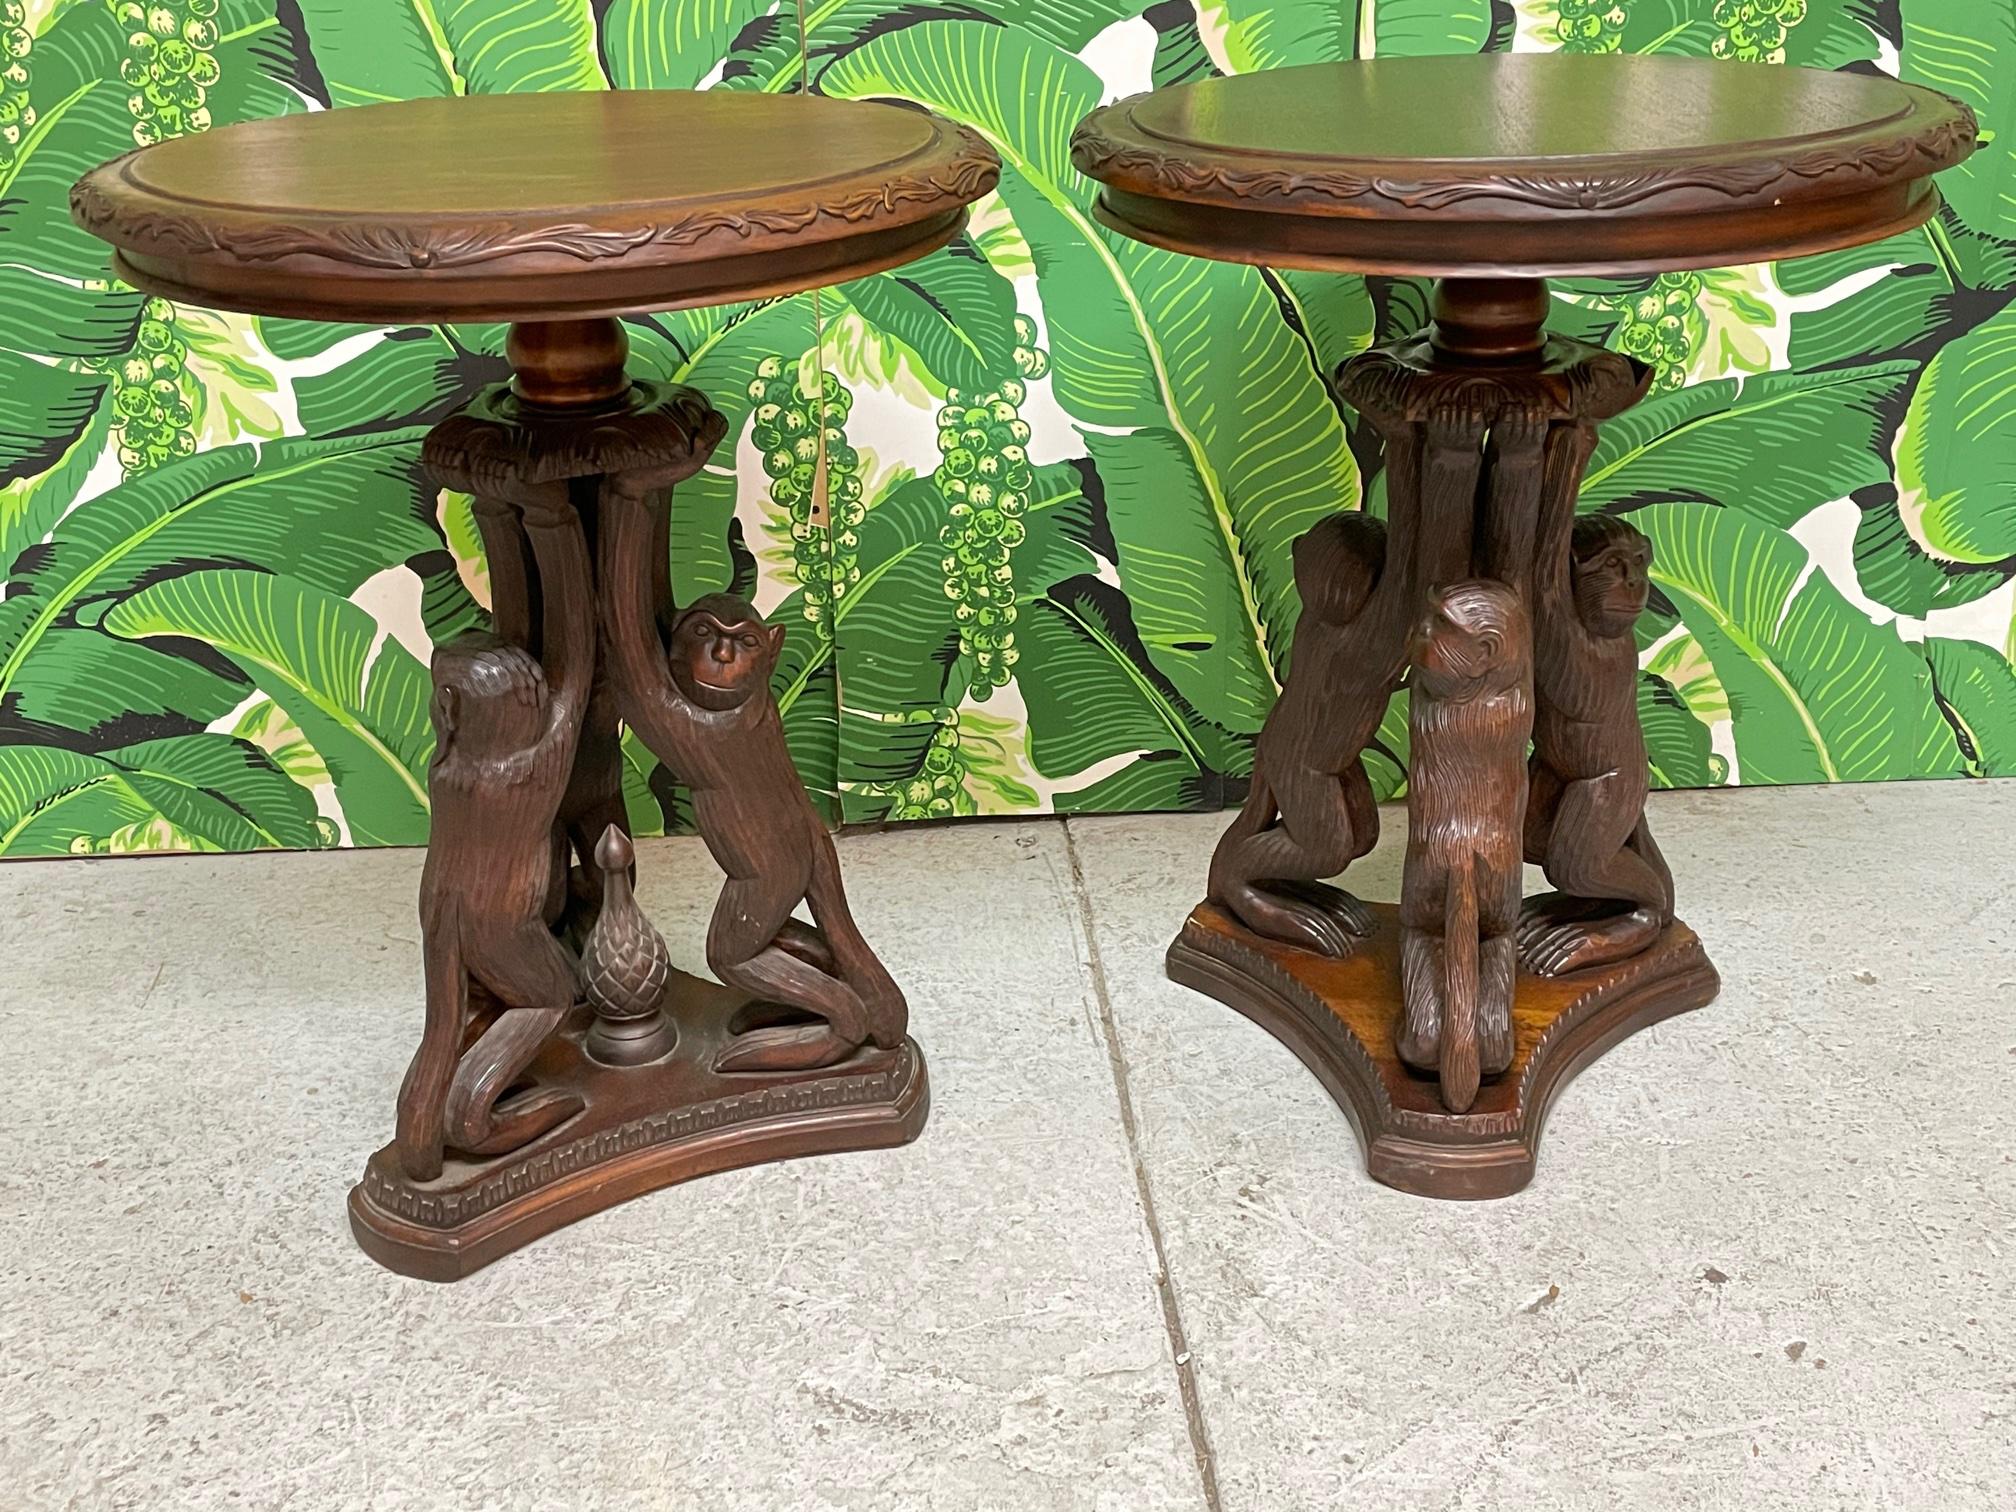 Pair of vintage side tables feature a fun motif of sculptural hand carved monkeys. Good vintage condition with minor imperfections consistent with age. One monkey's hand has a chip, see photos for condition details.
For a shipping quote to your